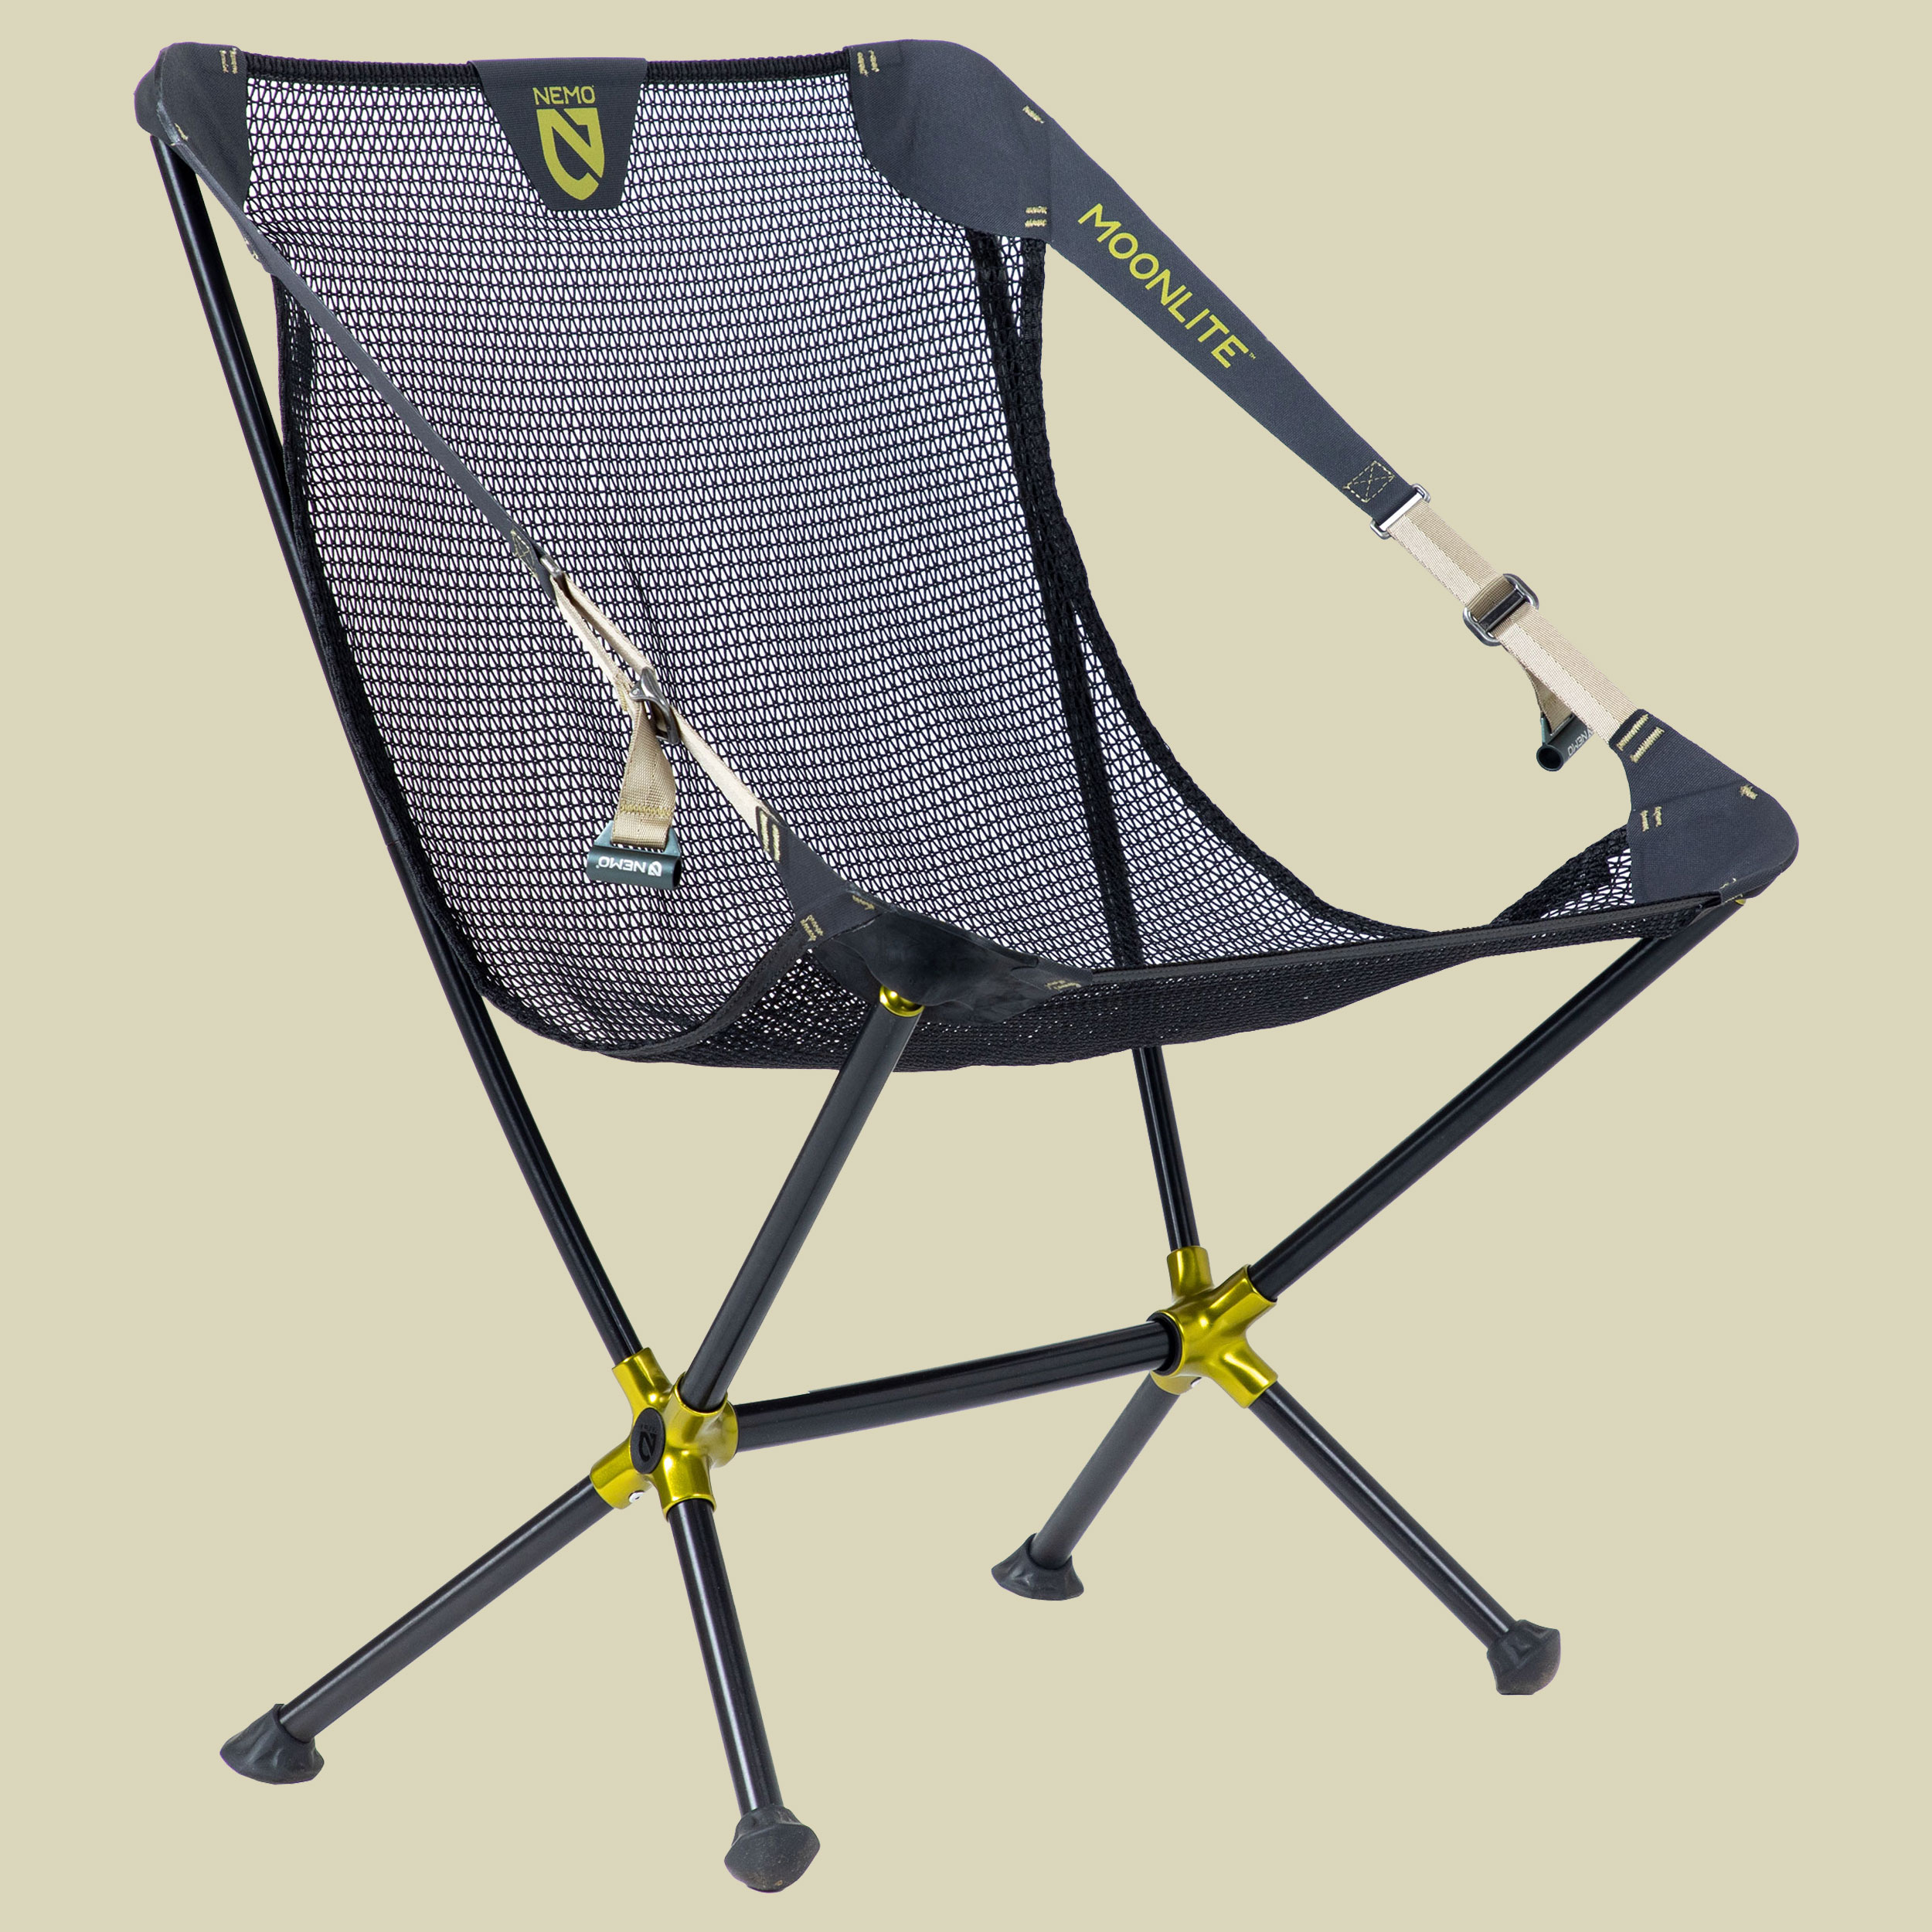 Moonlite Reclining Camp Chair Größe one size Farbe black pearl